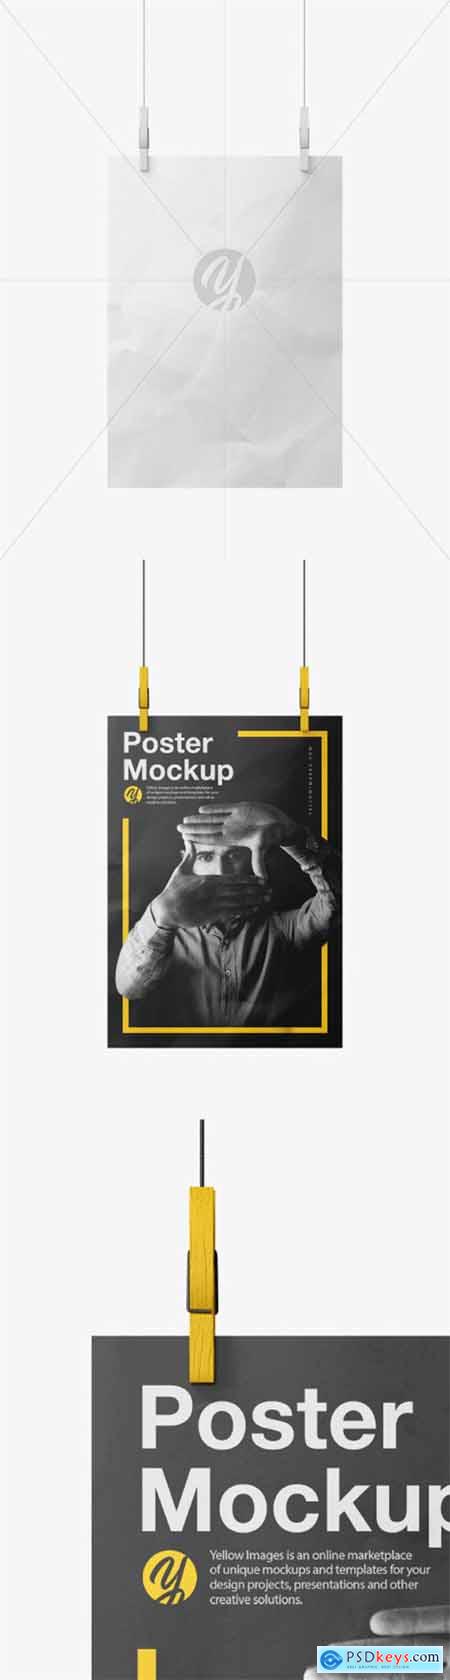 Download Crumpled A4 Poster Mockup 55270 Free Download Photoshop Vector Stock Image Via Torrent Zippyshare From Psdkeys Com PSD Mockup Templates